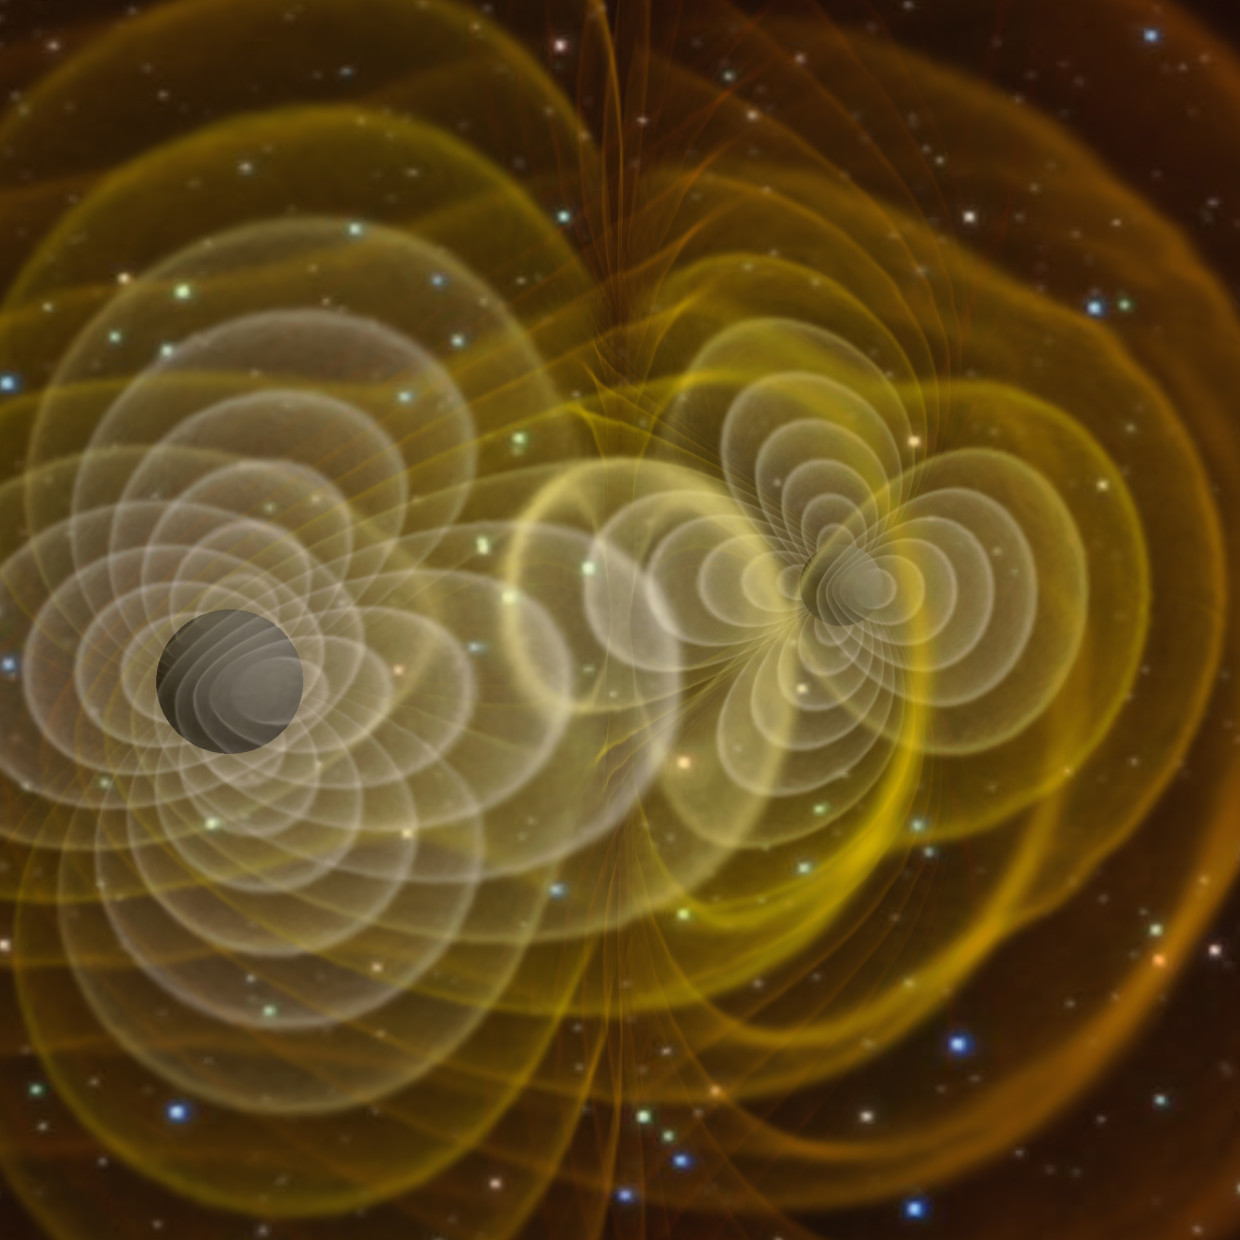 This 3-D visualization shows the gravitational waves produced by two orbiting black holes. (Credit: NASA)